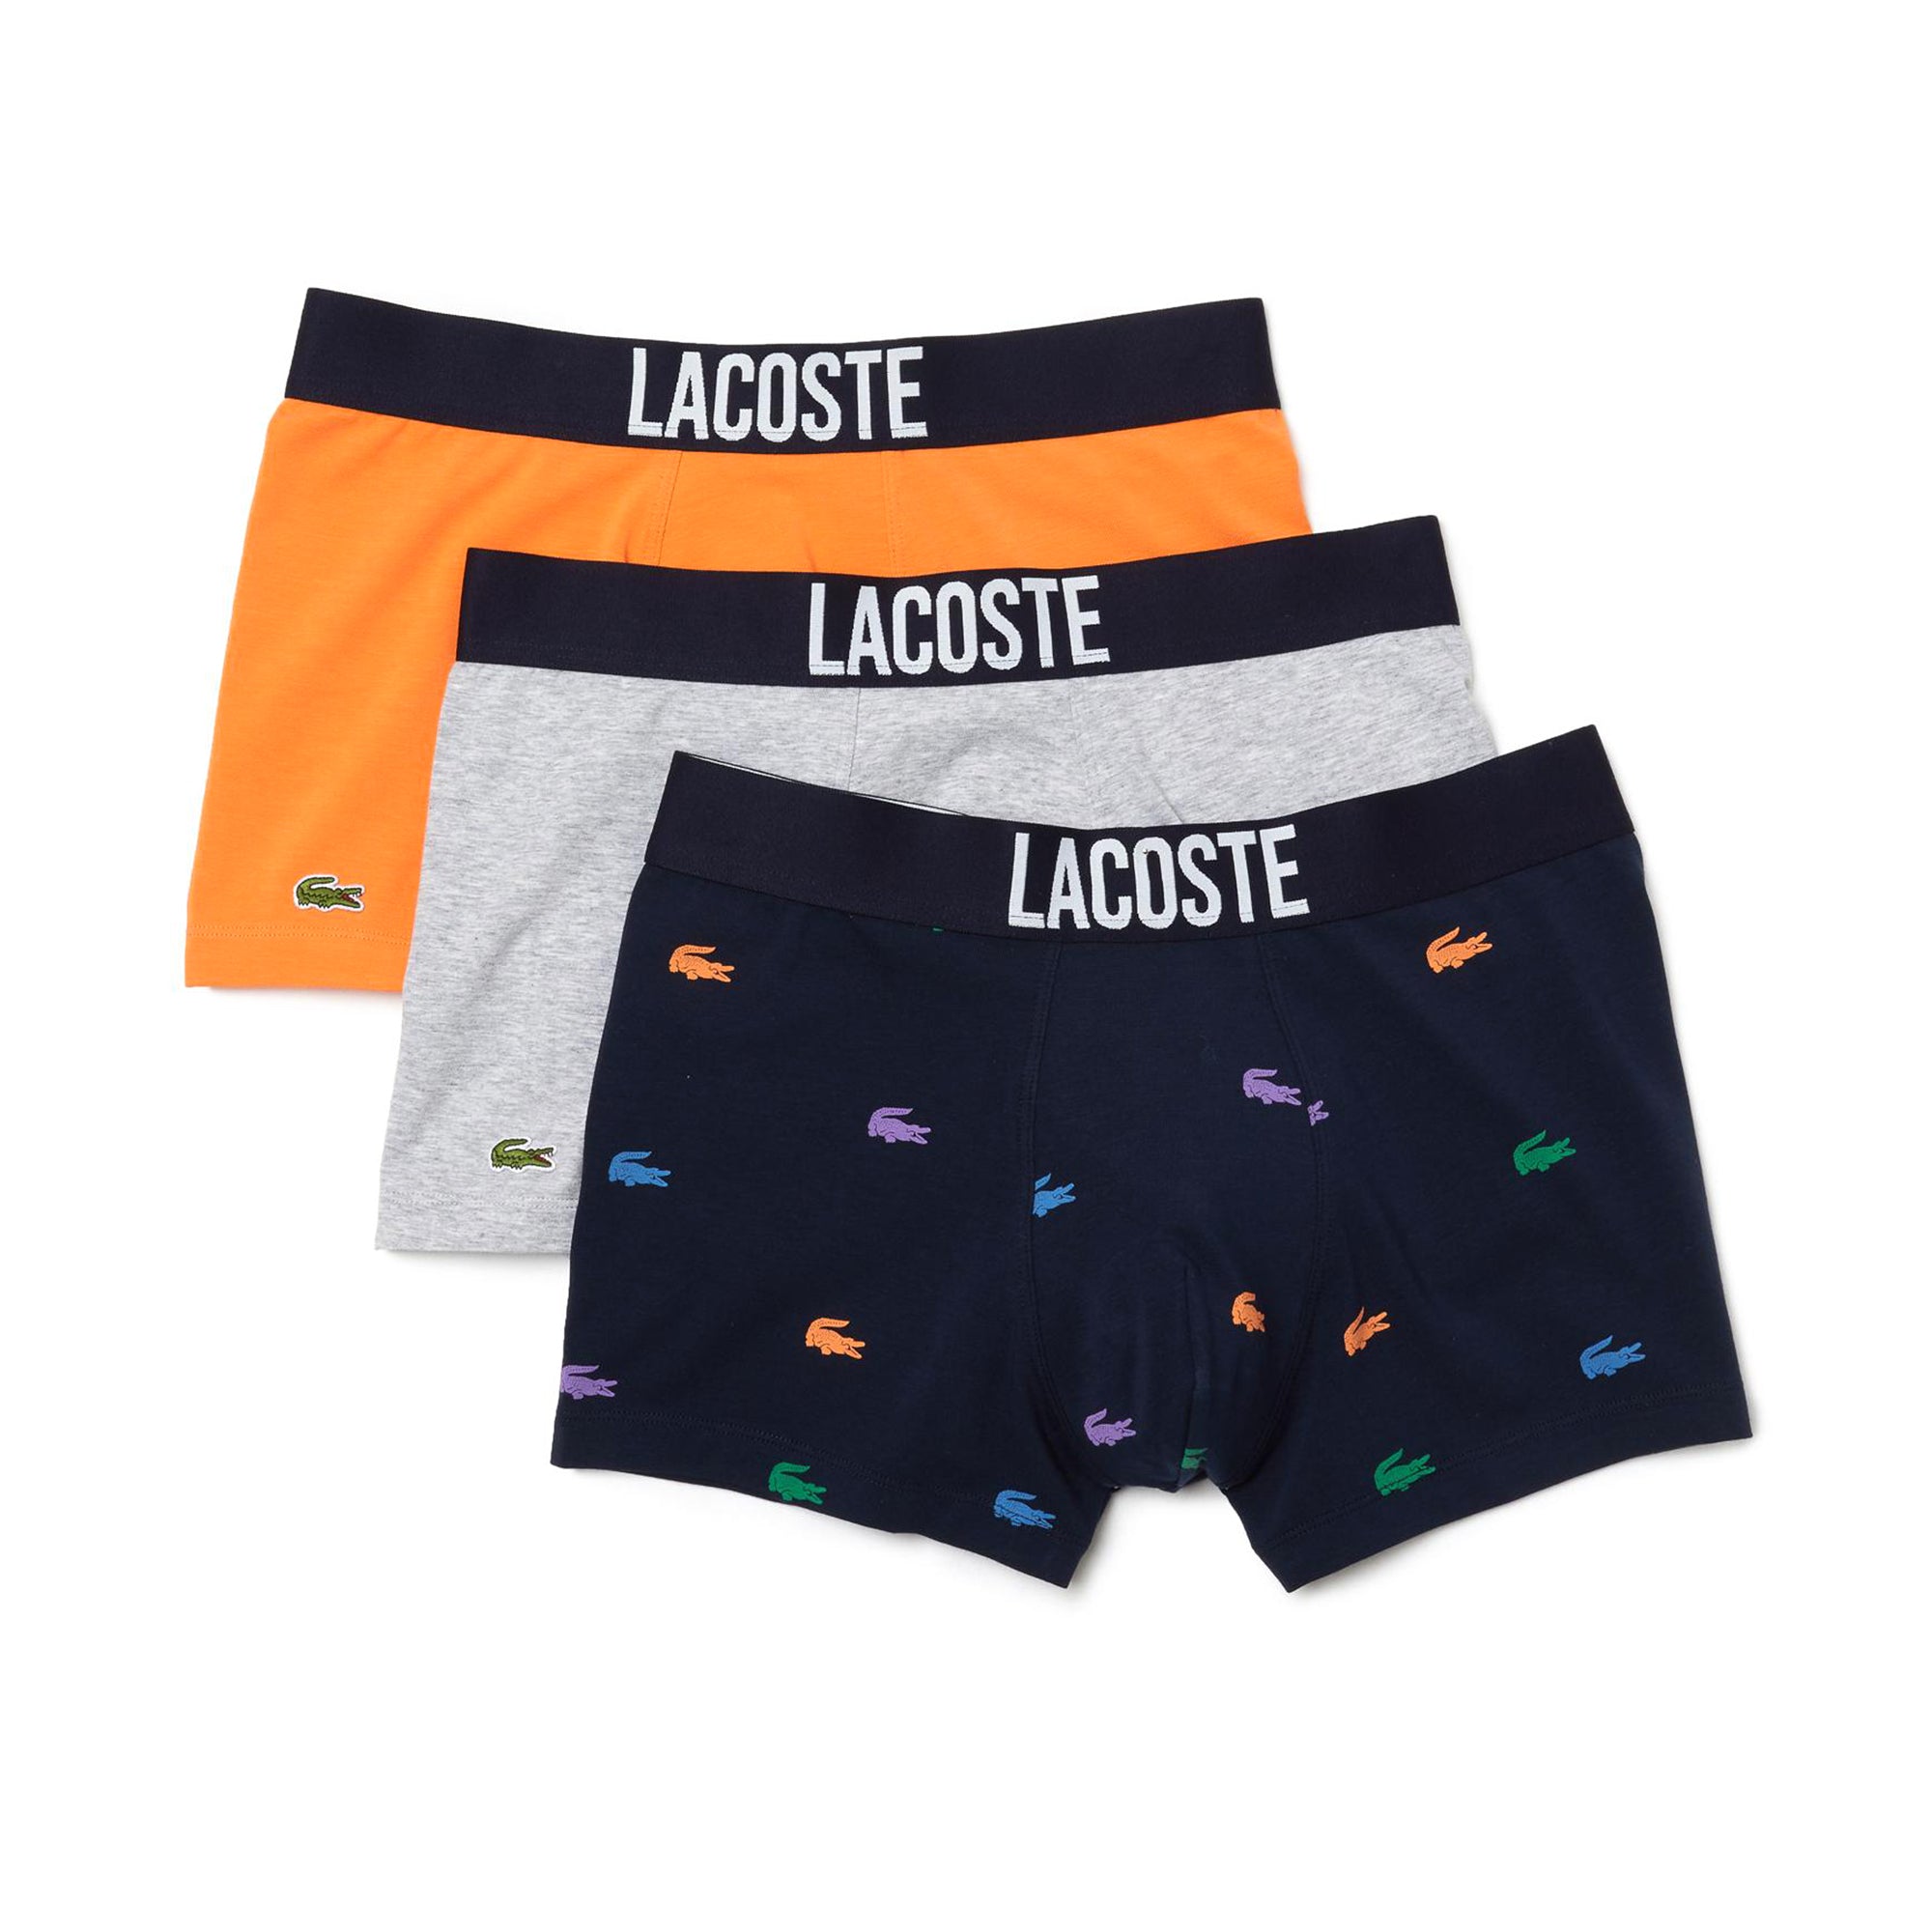 lacoste-cotton-stretch-trunk-3-pack-5h1284-navy-multi-silver-pmf